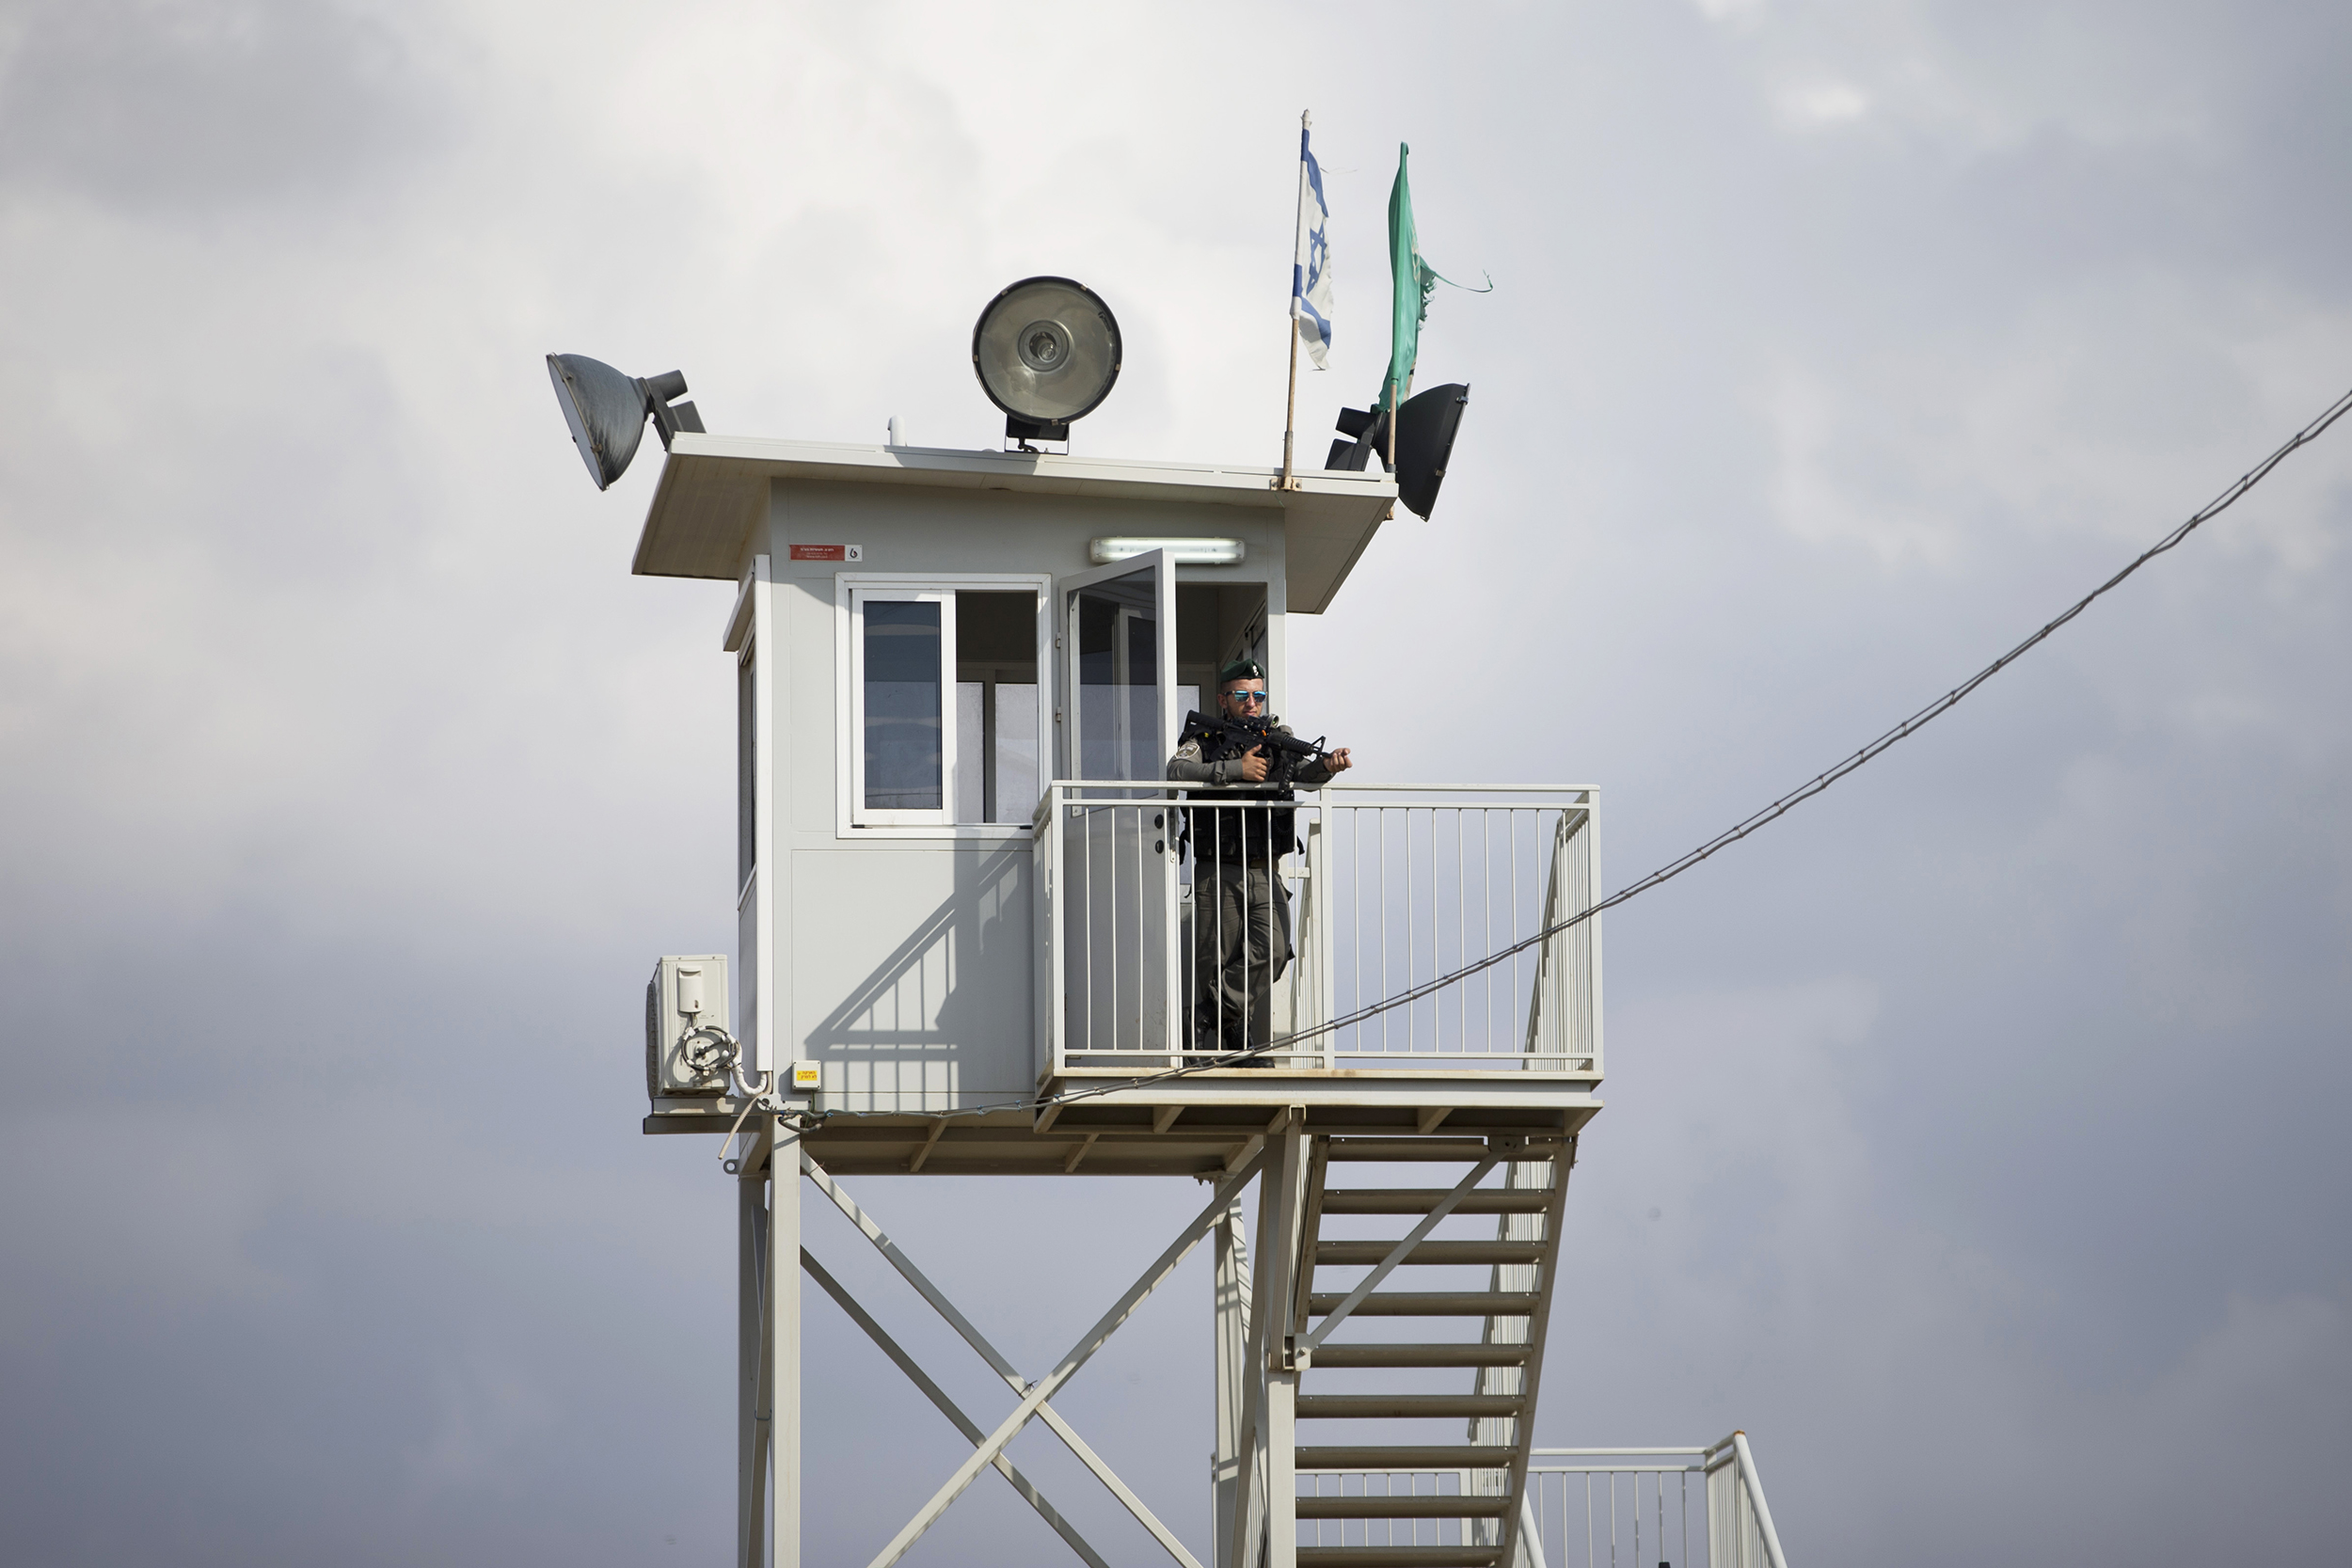 An Israeli border police officer watches from a tower at a checkpoint near the West Bank town of Nablus, Friday, Oct. 30, 2015. Israeli police said two Palestinians ran toward the West Bank checkpoint with knives in their hands, drawing Israeli fire that killed one and wounded the second.